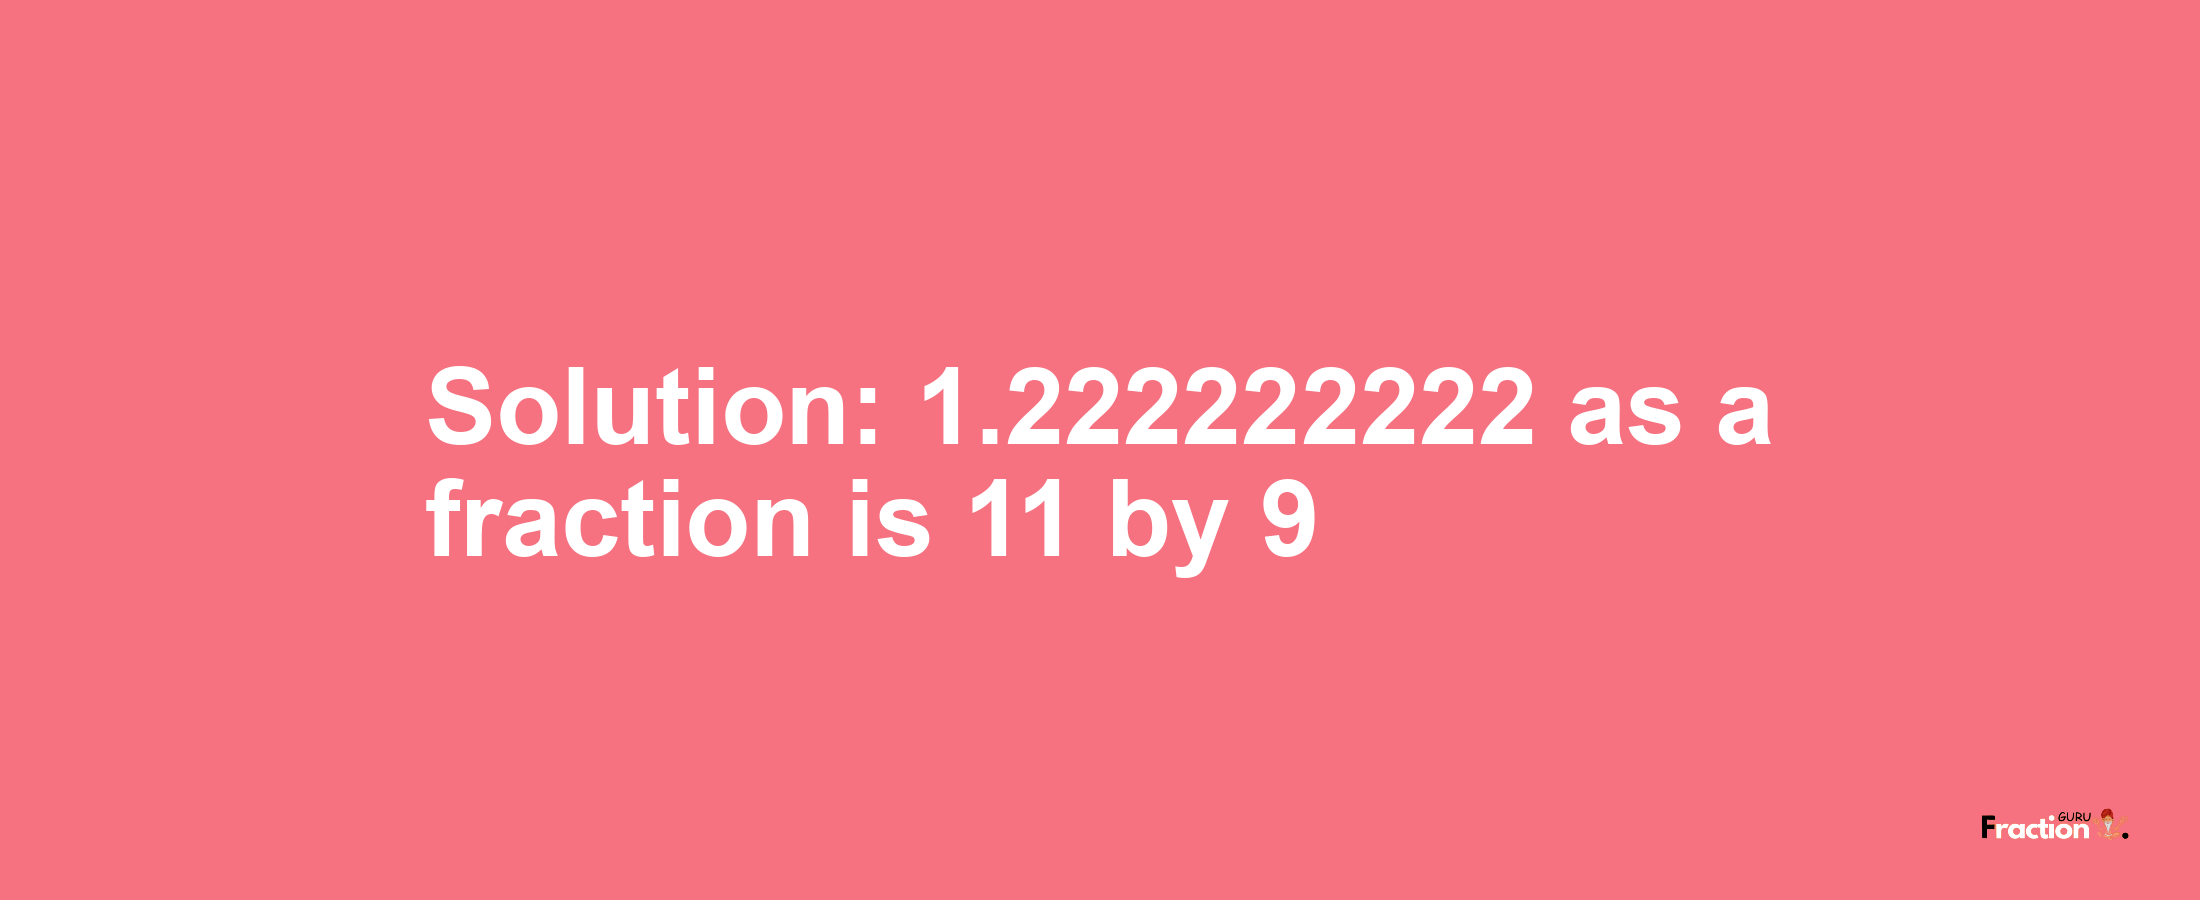 Solution:1.222222222 as a fraction is 11/9